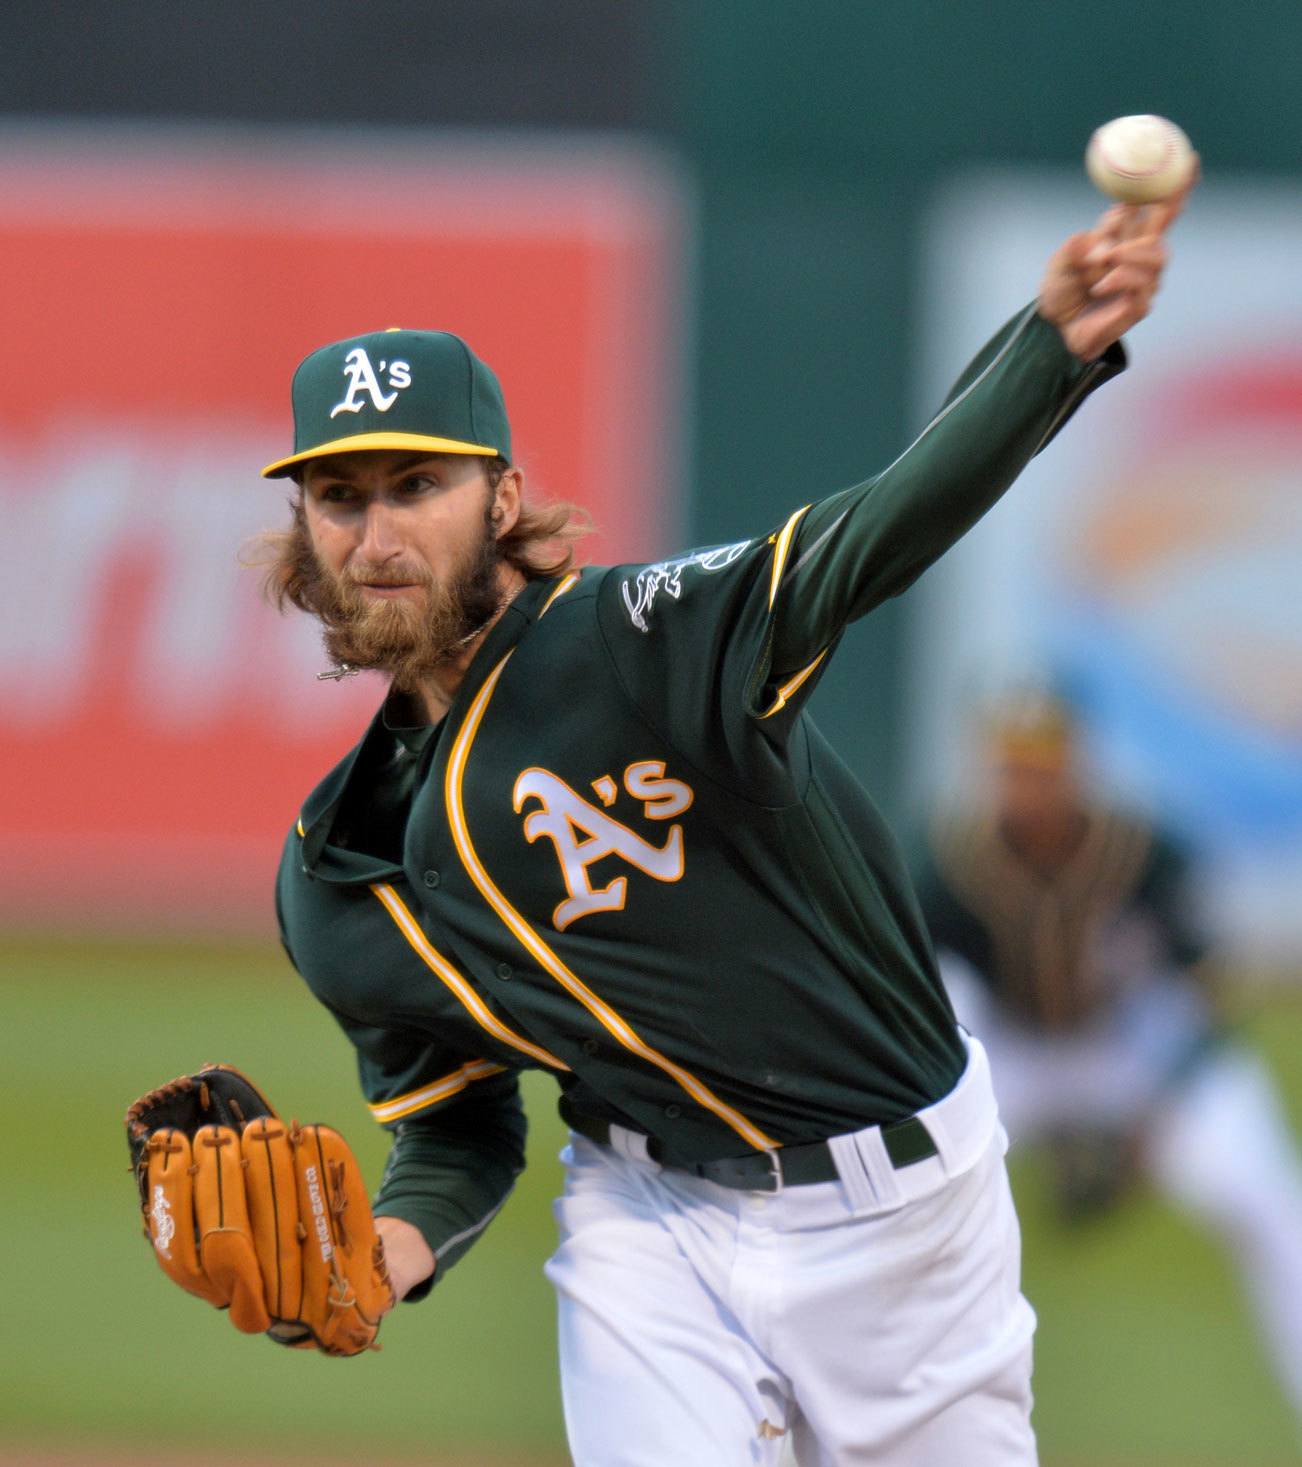 Mariners acquire left-handed pitcher Dillon Overton from the Athletics in a trade